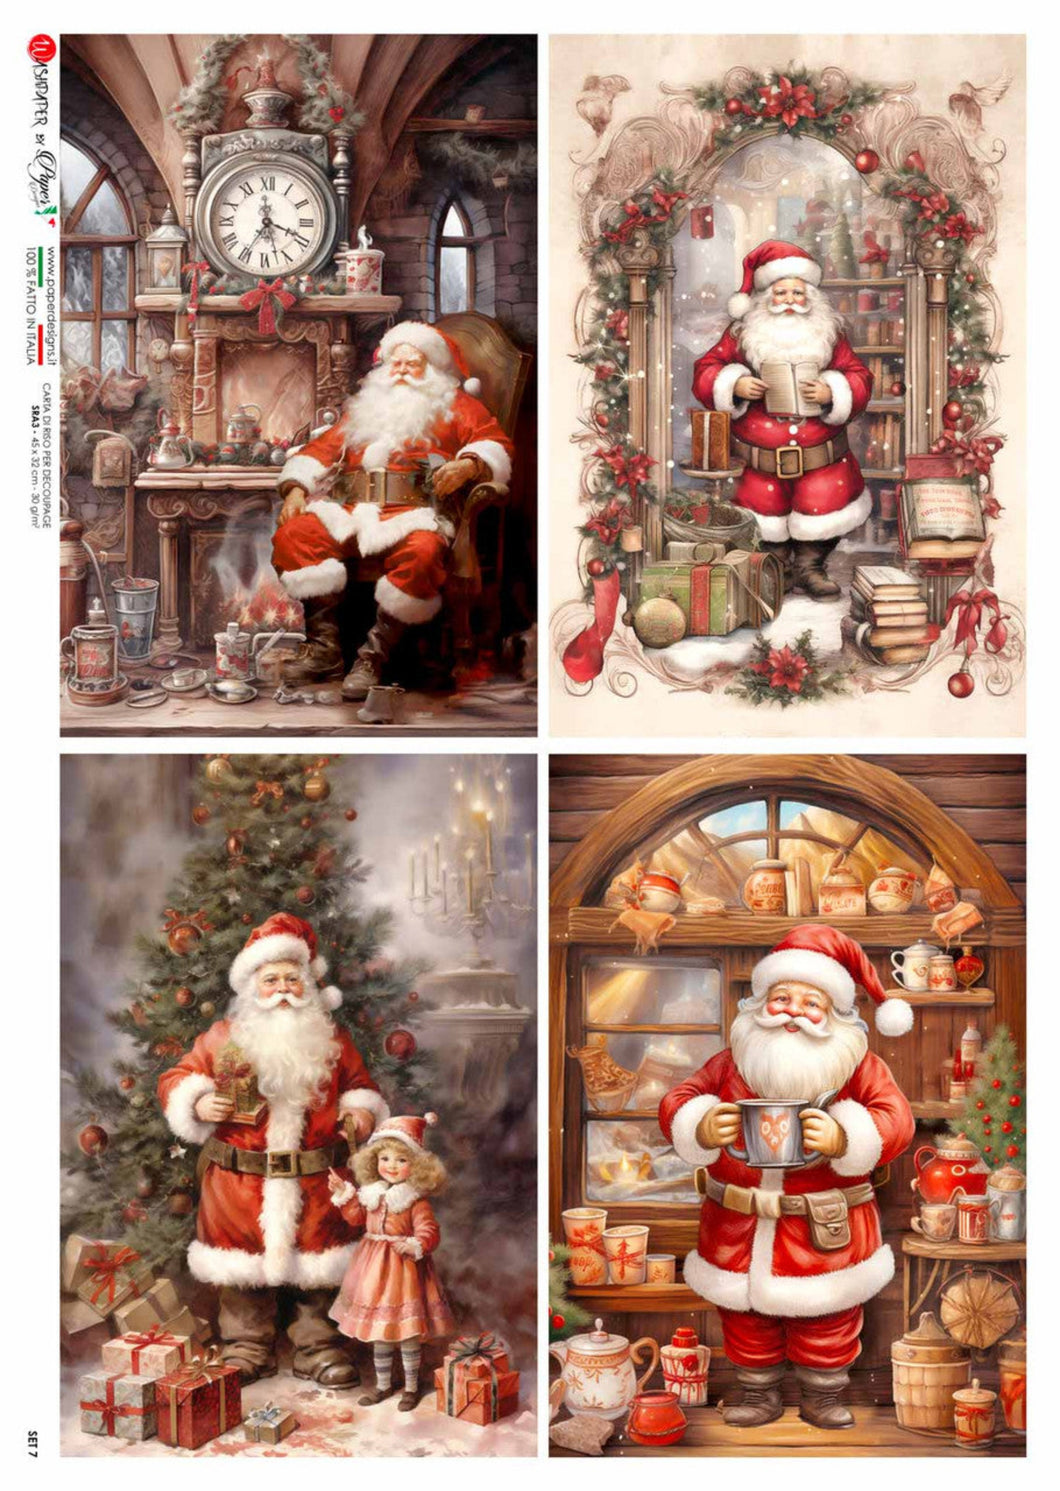 Festive Santas Four Pack by Paper Designs Washipaper, 4 images on 1 sheet rice paper